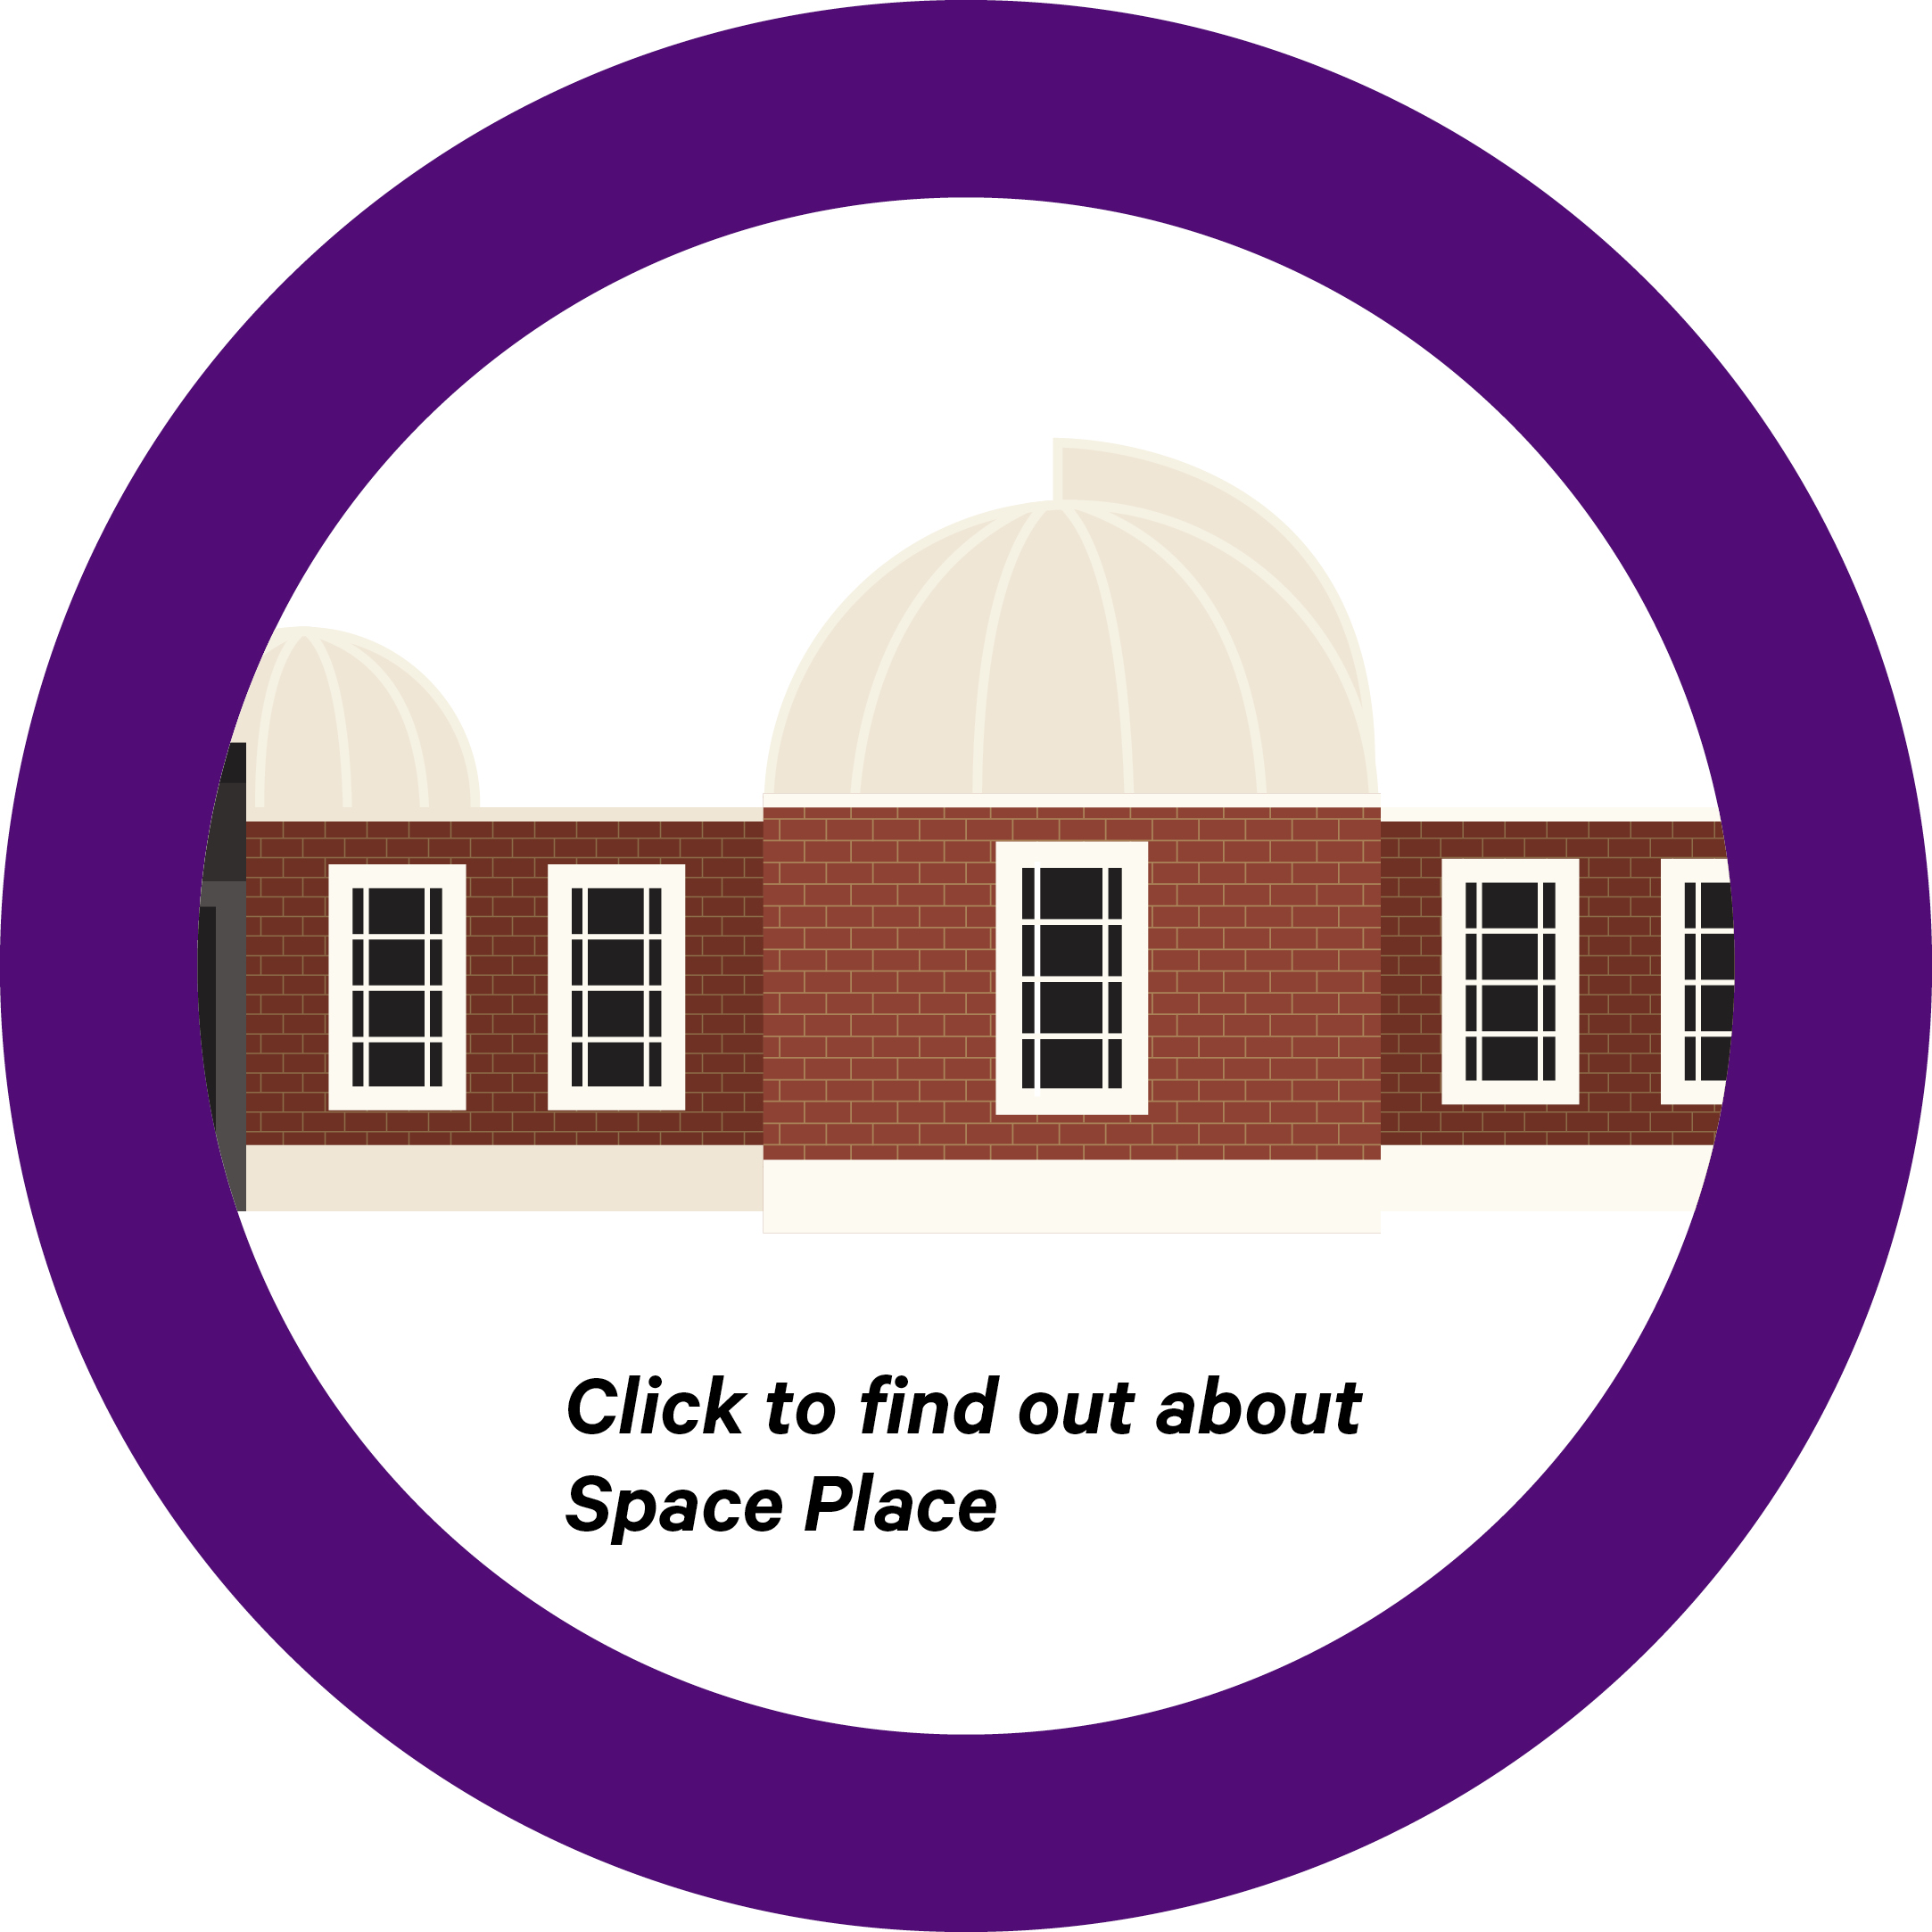 Space Place Illustration